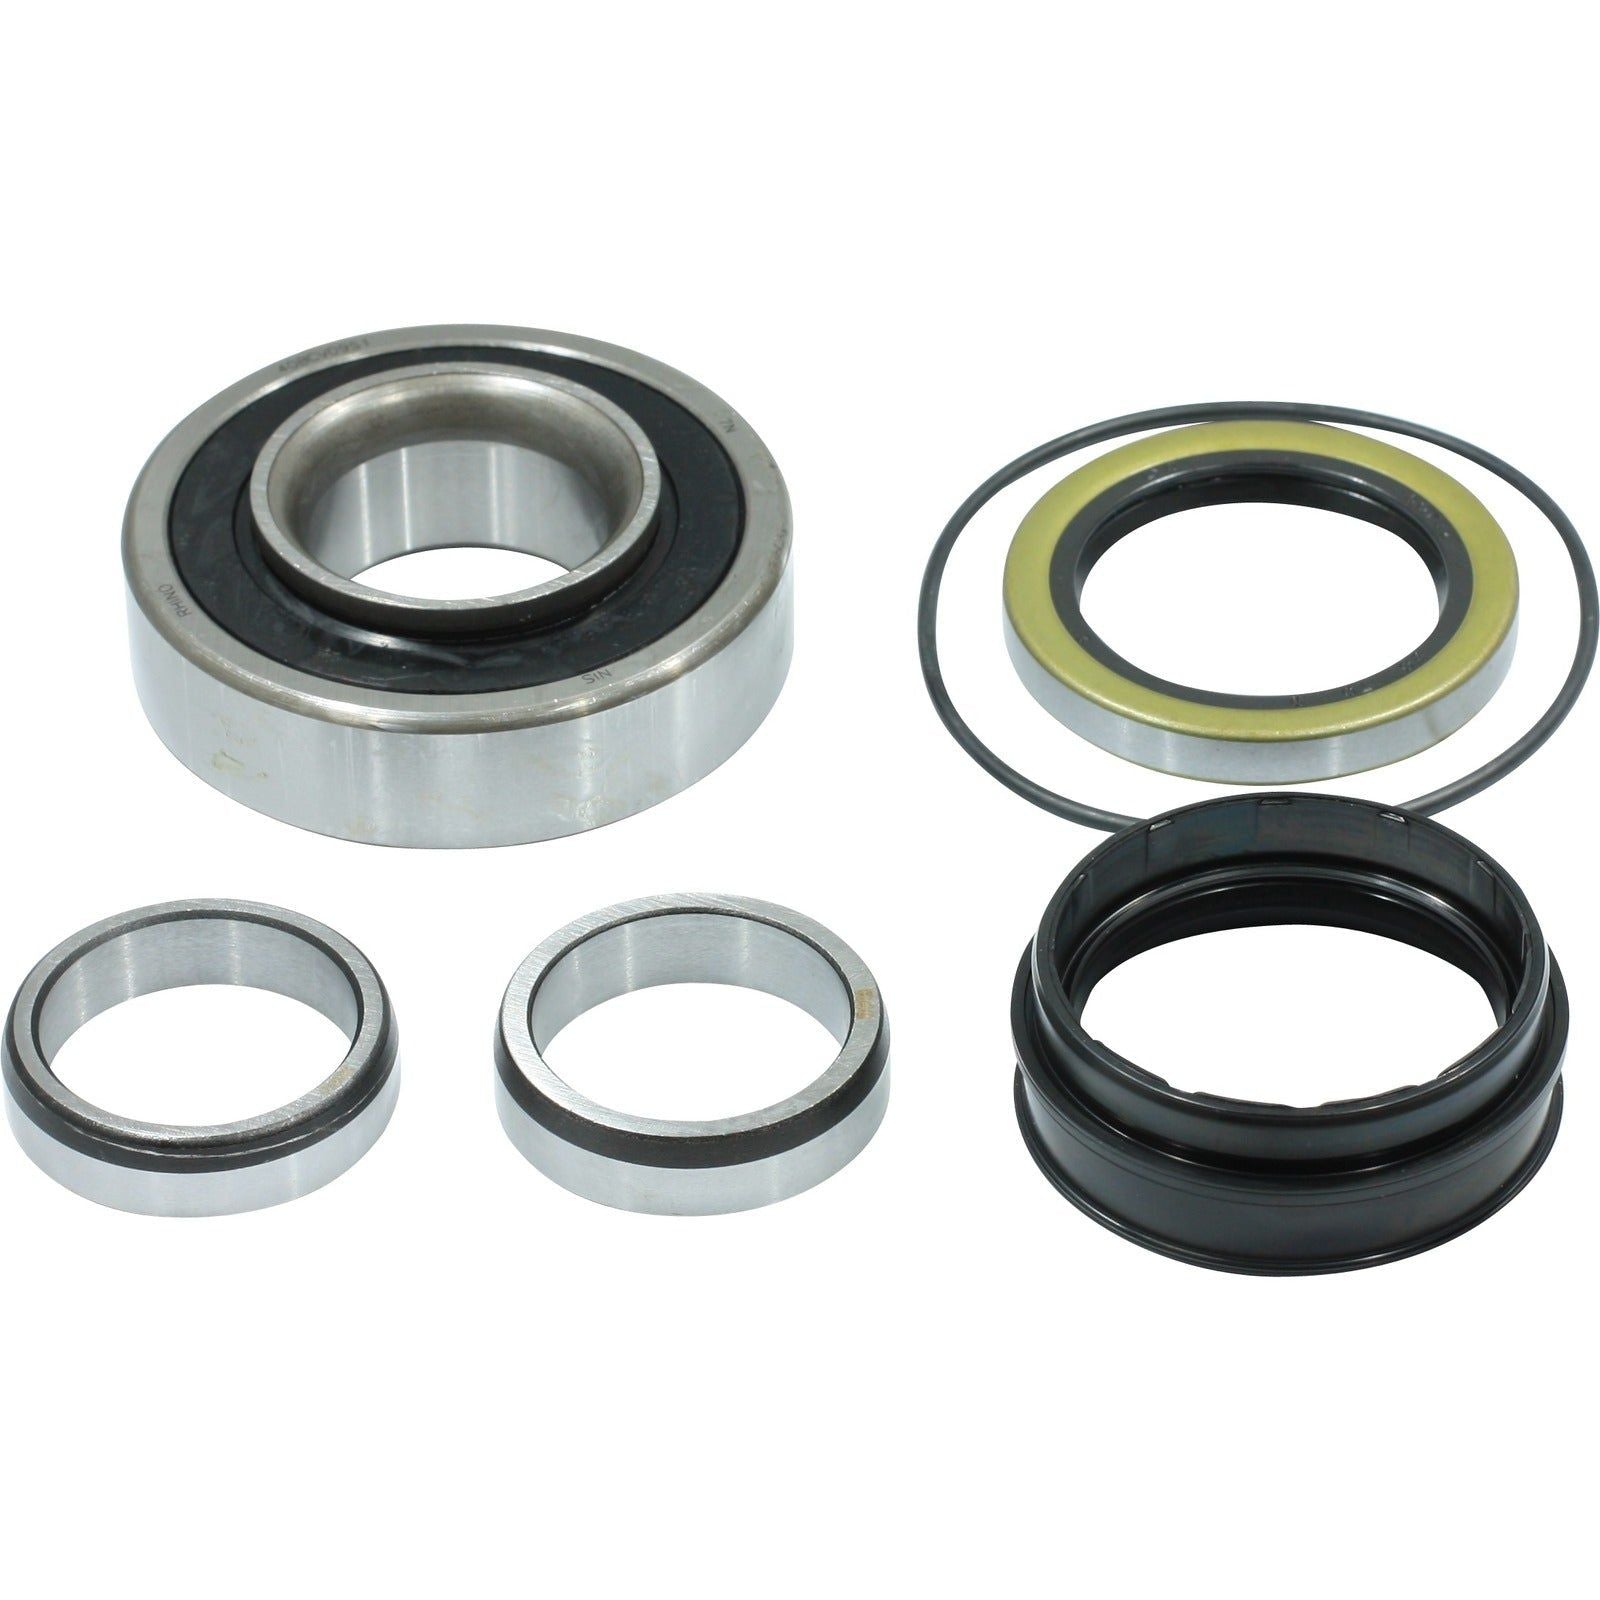 Rear Wheel Bearing Kit For Toyota Hilux Hiace Dyna with ABS